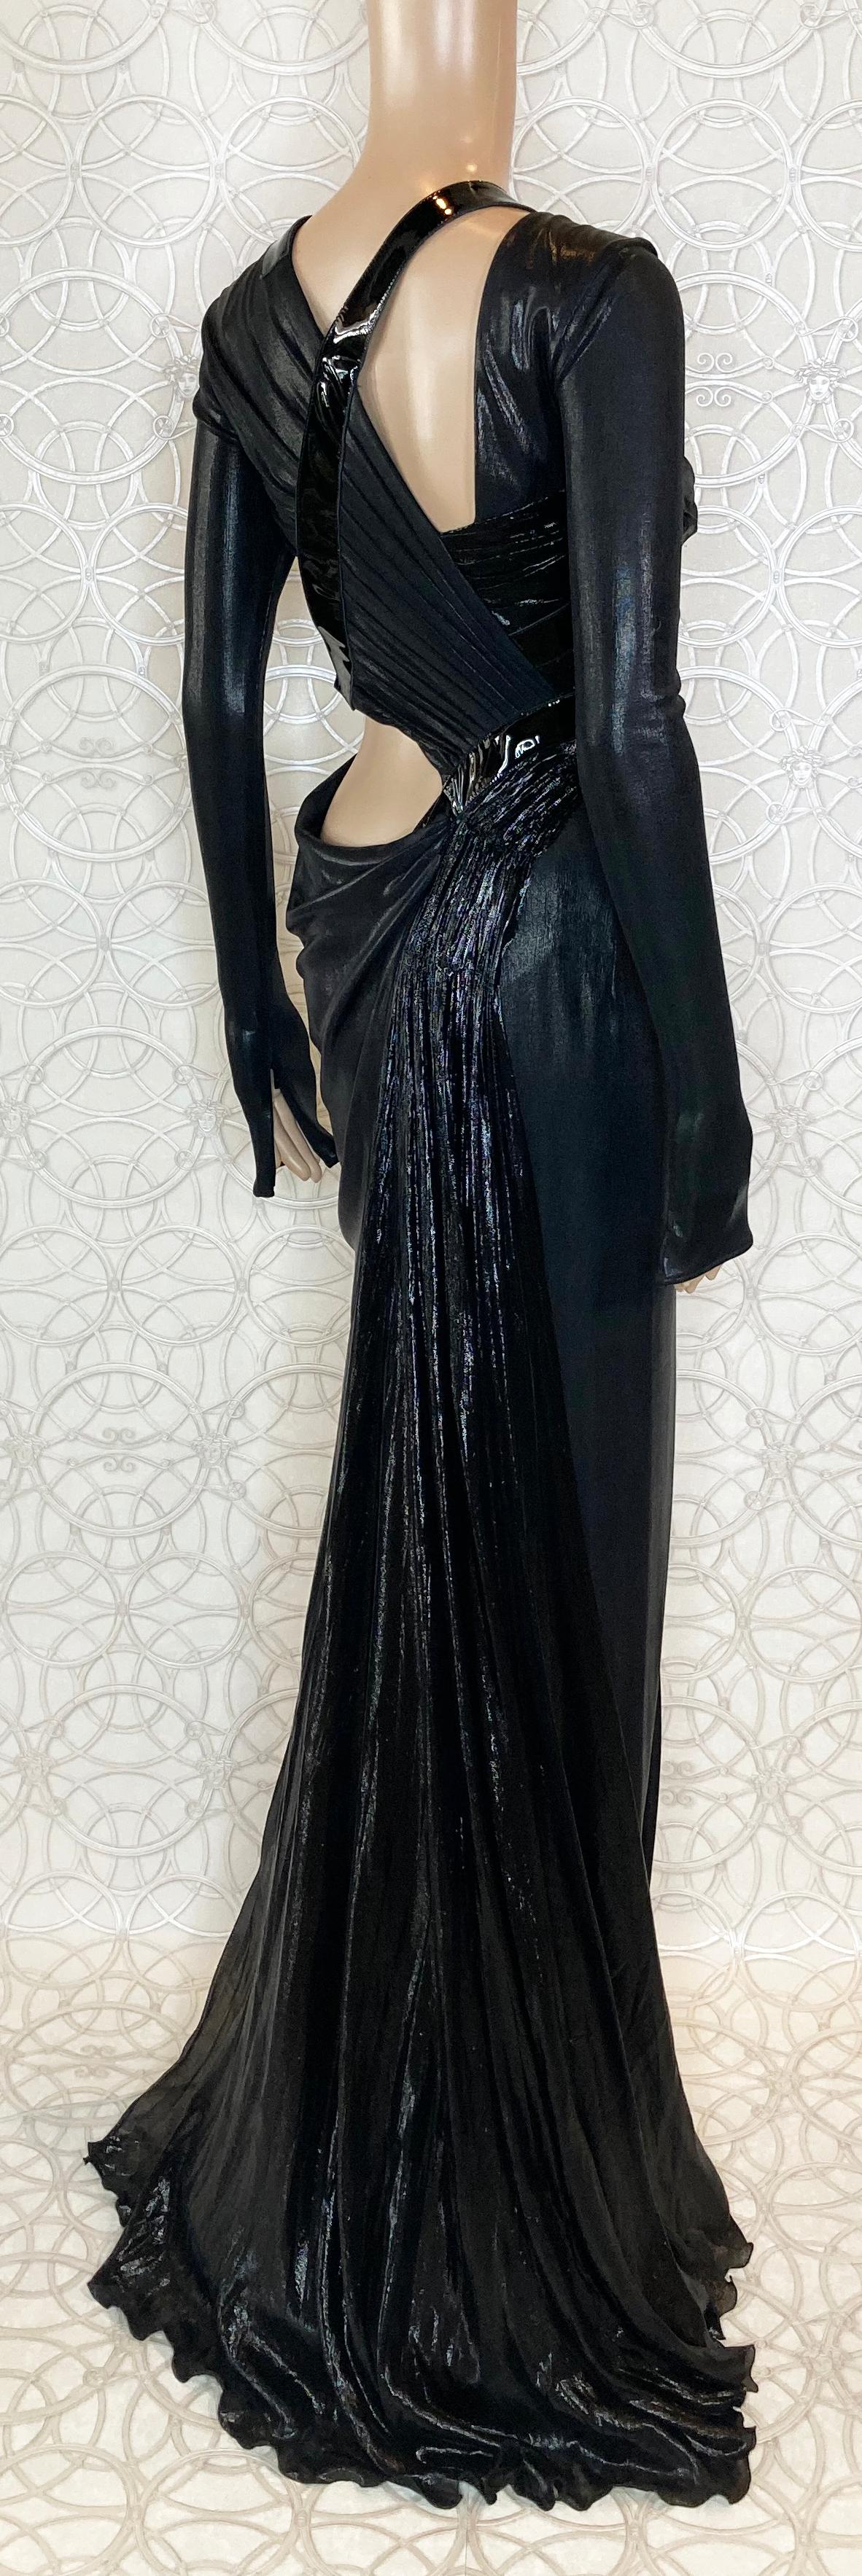 New VERSACE Hottest Black Liquid Jersey Gown With Vinyl Sleeves 6